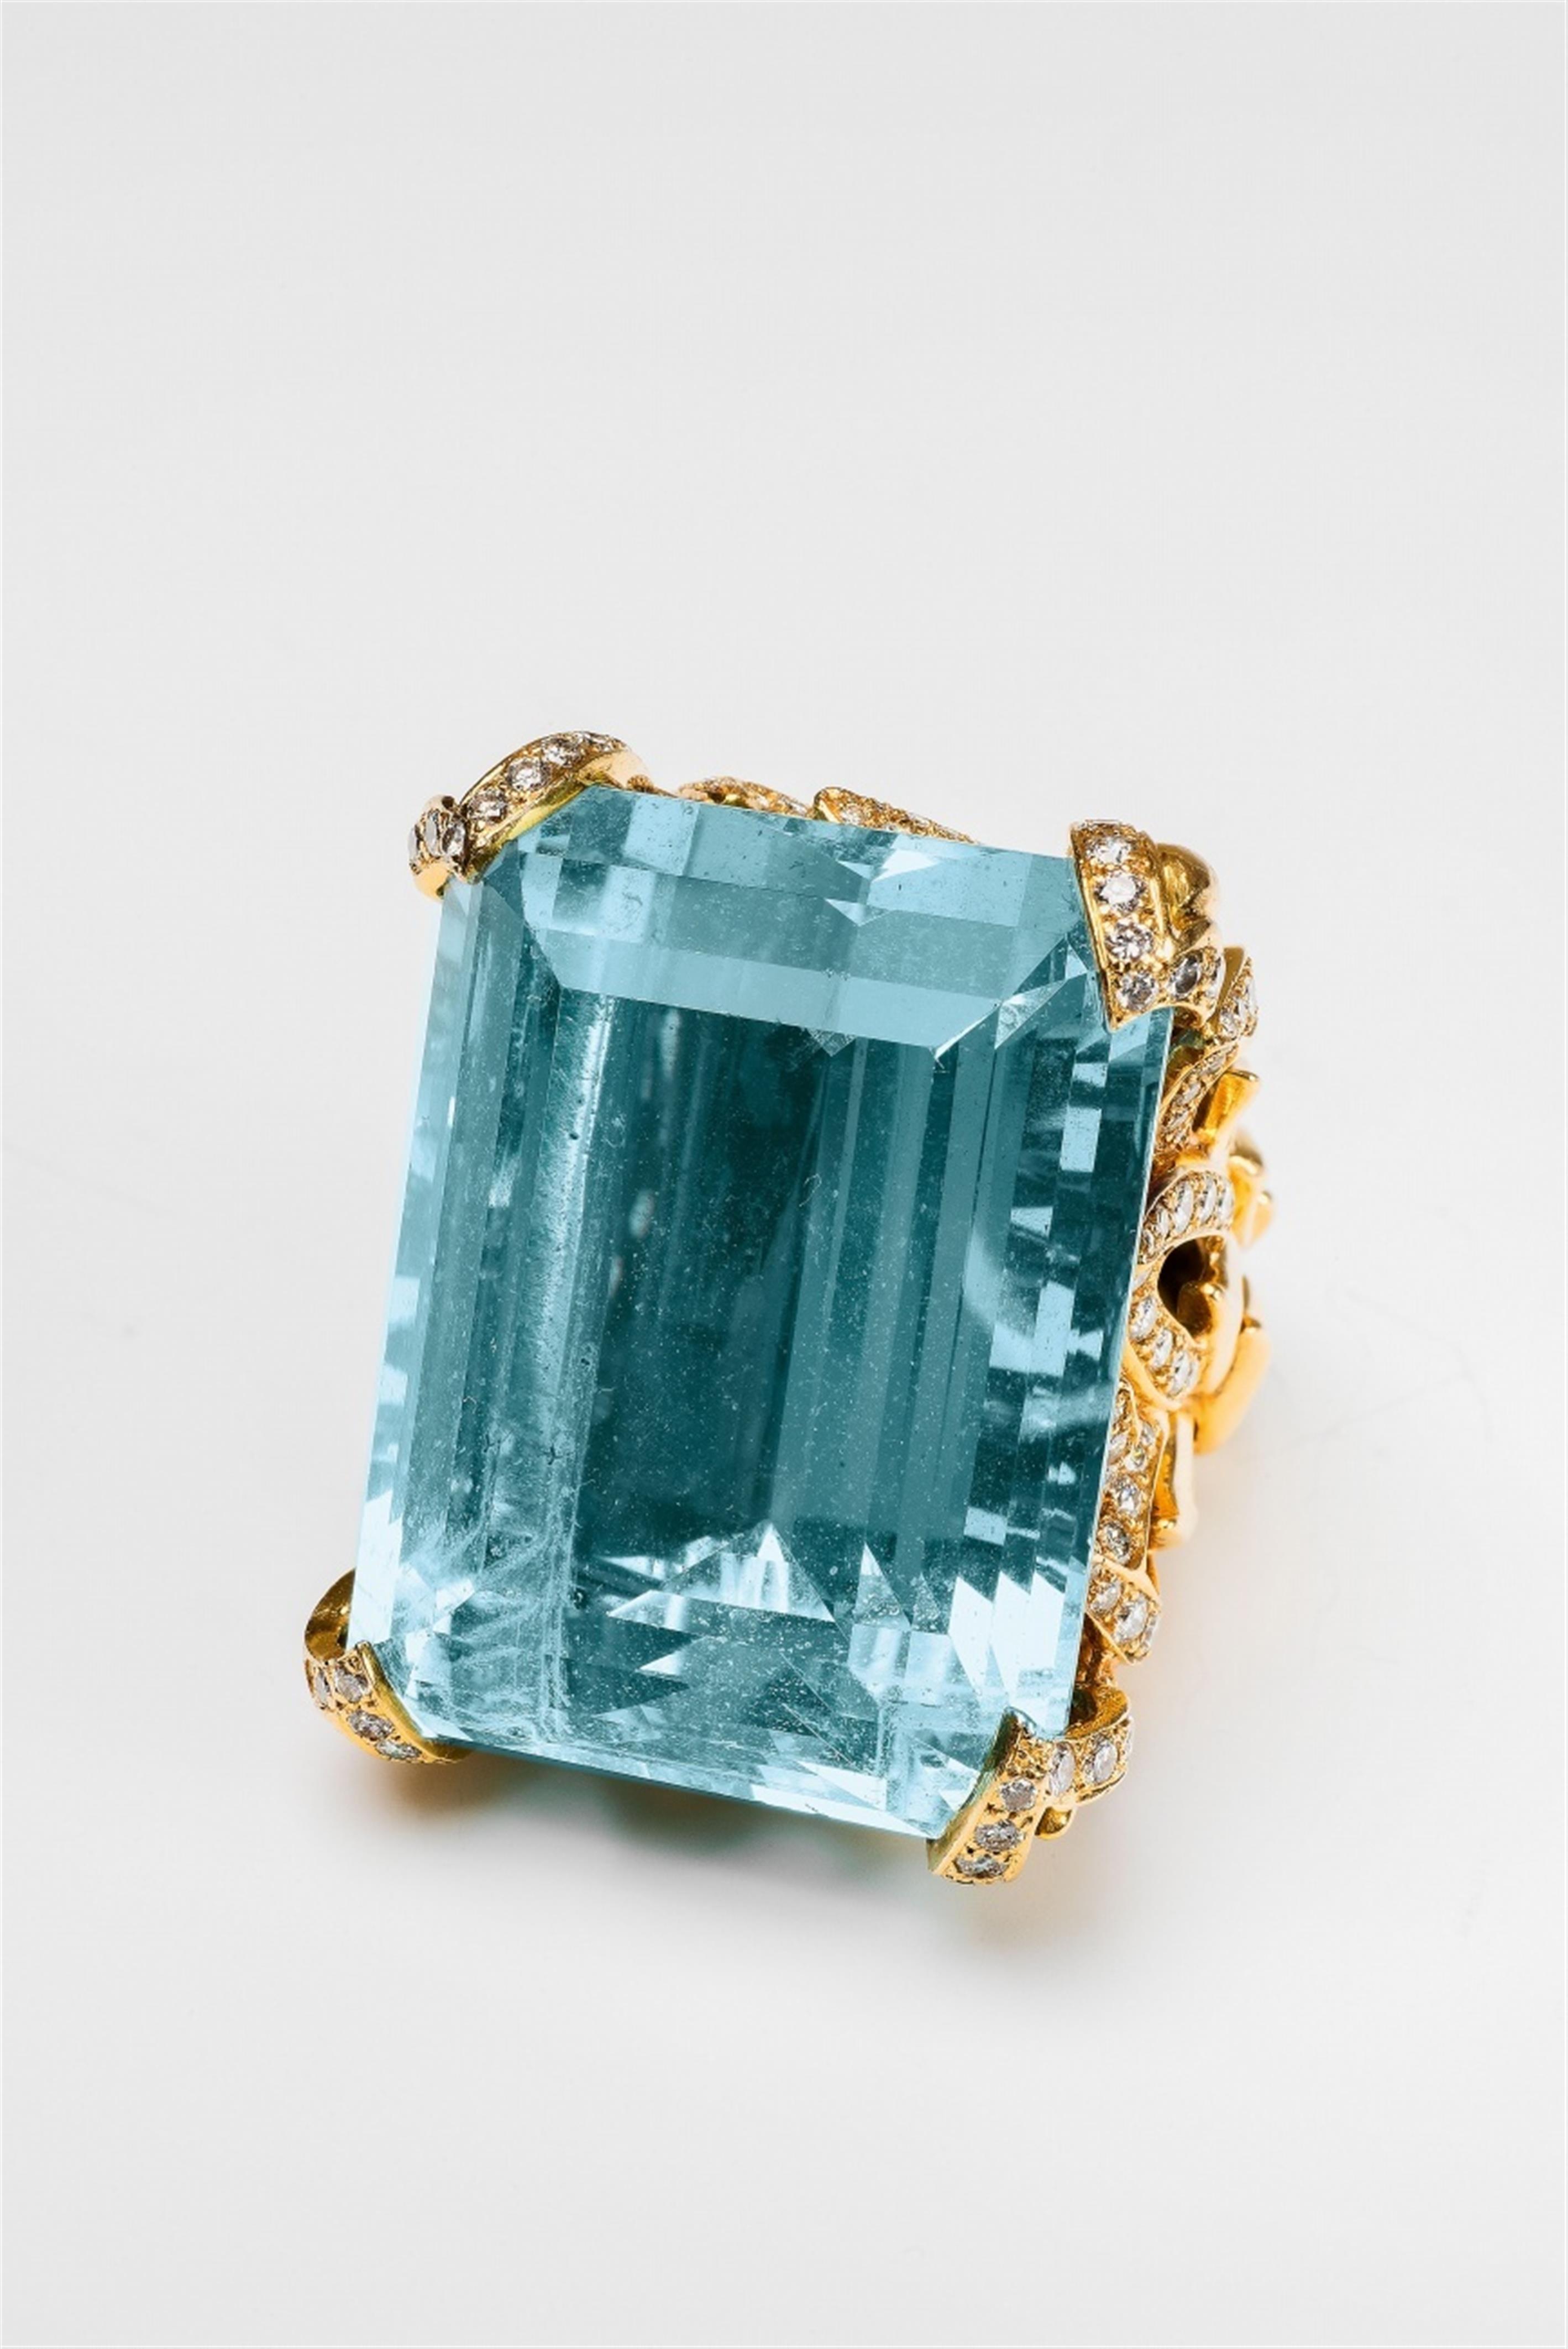 A Dior cocktail ring with a large aquamarine - image-4